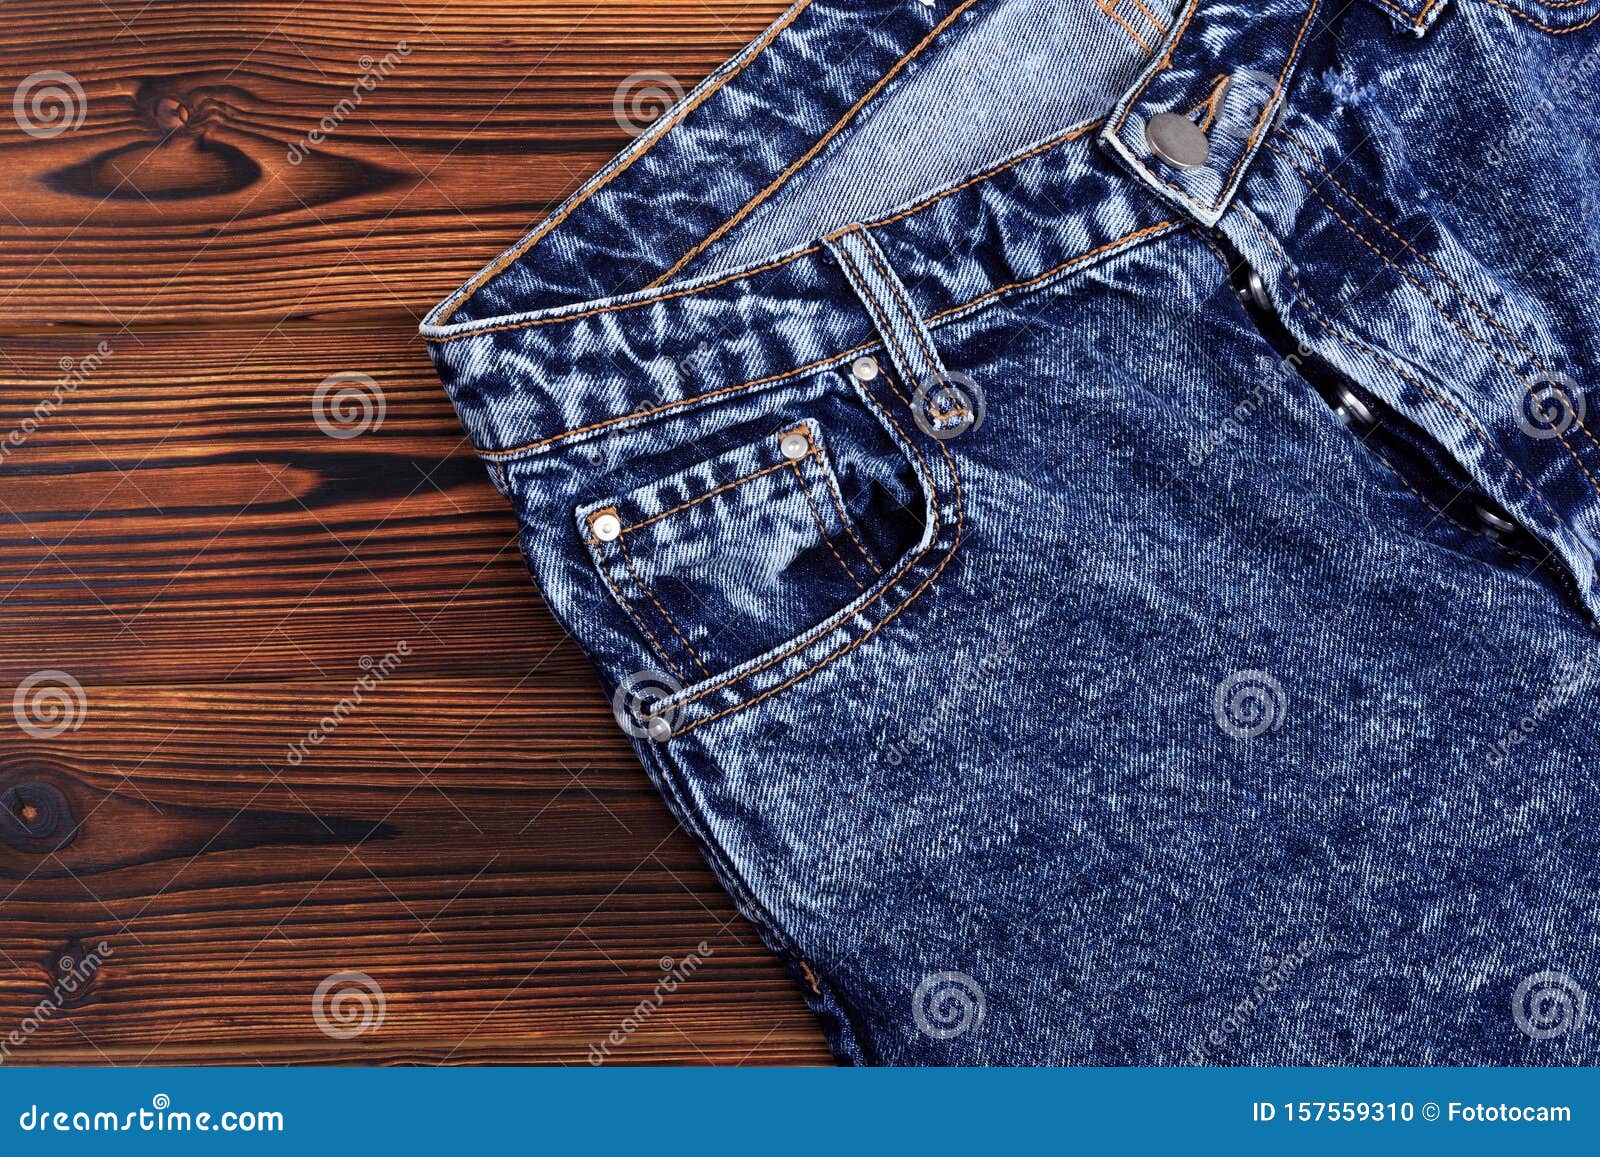 Blue Denim Jeans on Wooden Background Stock Photo - Image of closeup ...